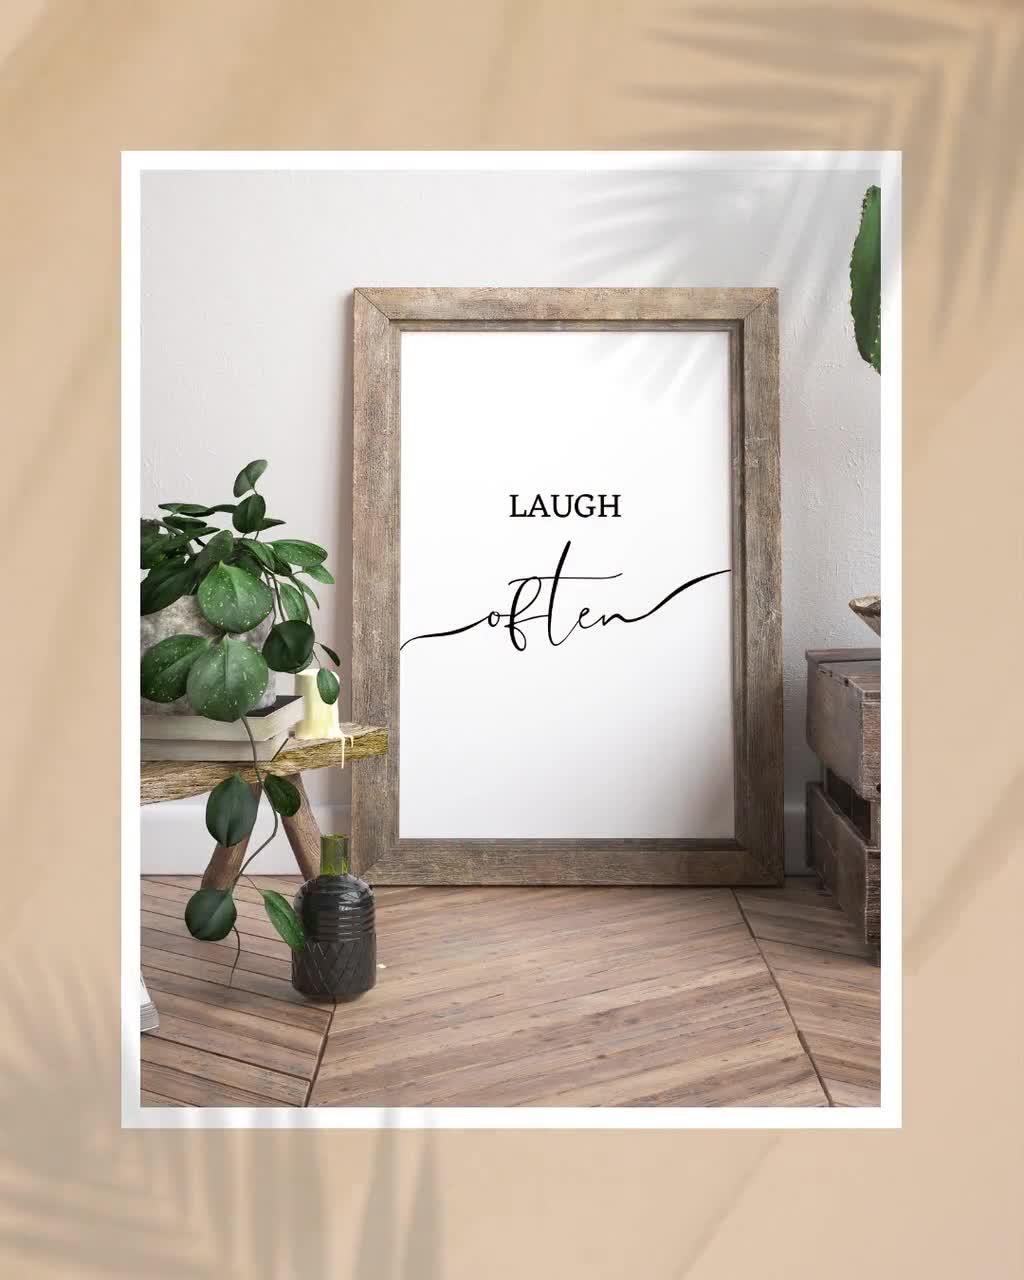 Eat Laugh Love, Kitchen Wall Decor, Home Wall Art Decor, Dining Room Decor,  Printable, Set of 3 Prints, Digital Download, Quotes for Home 